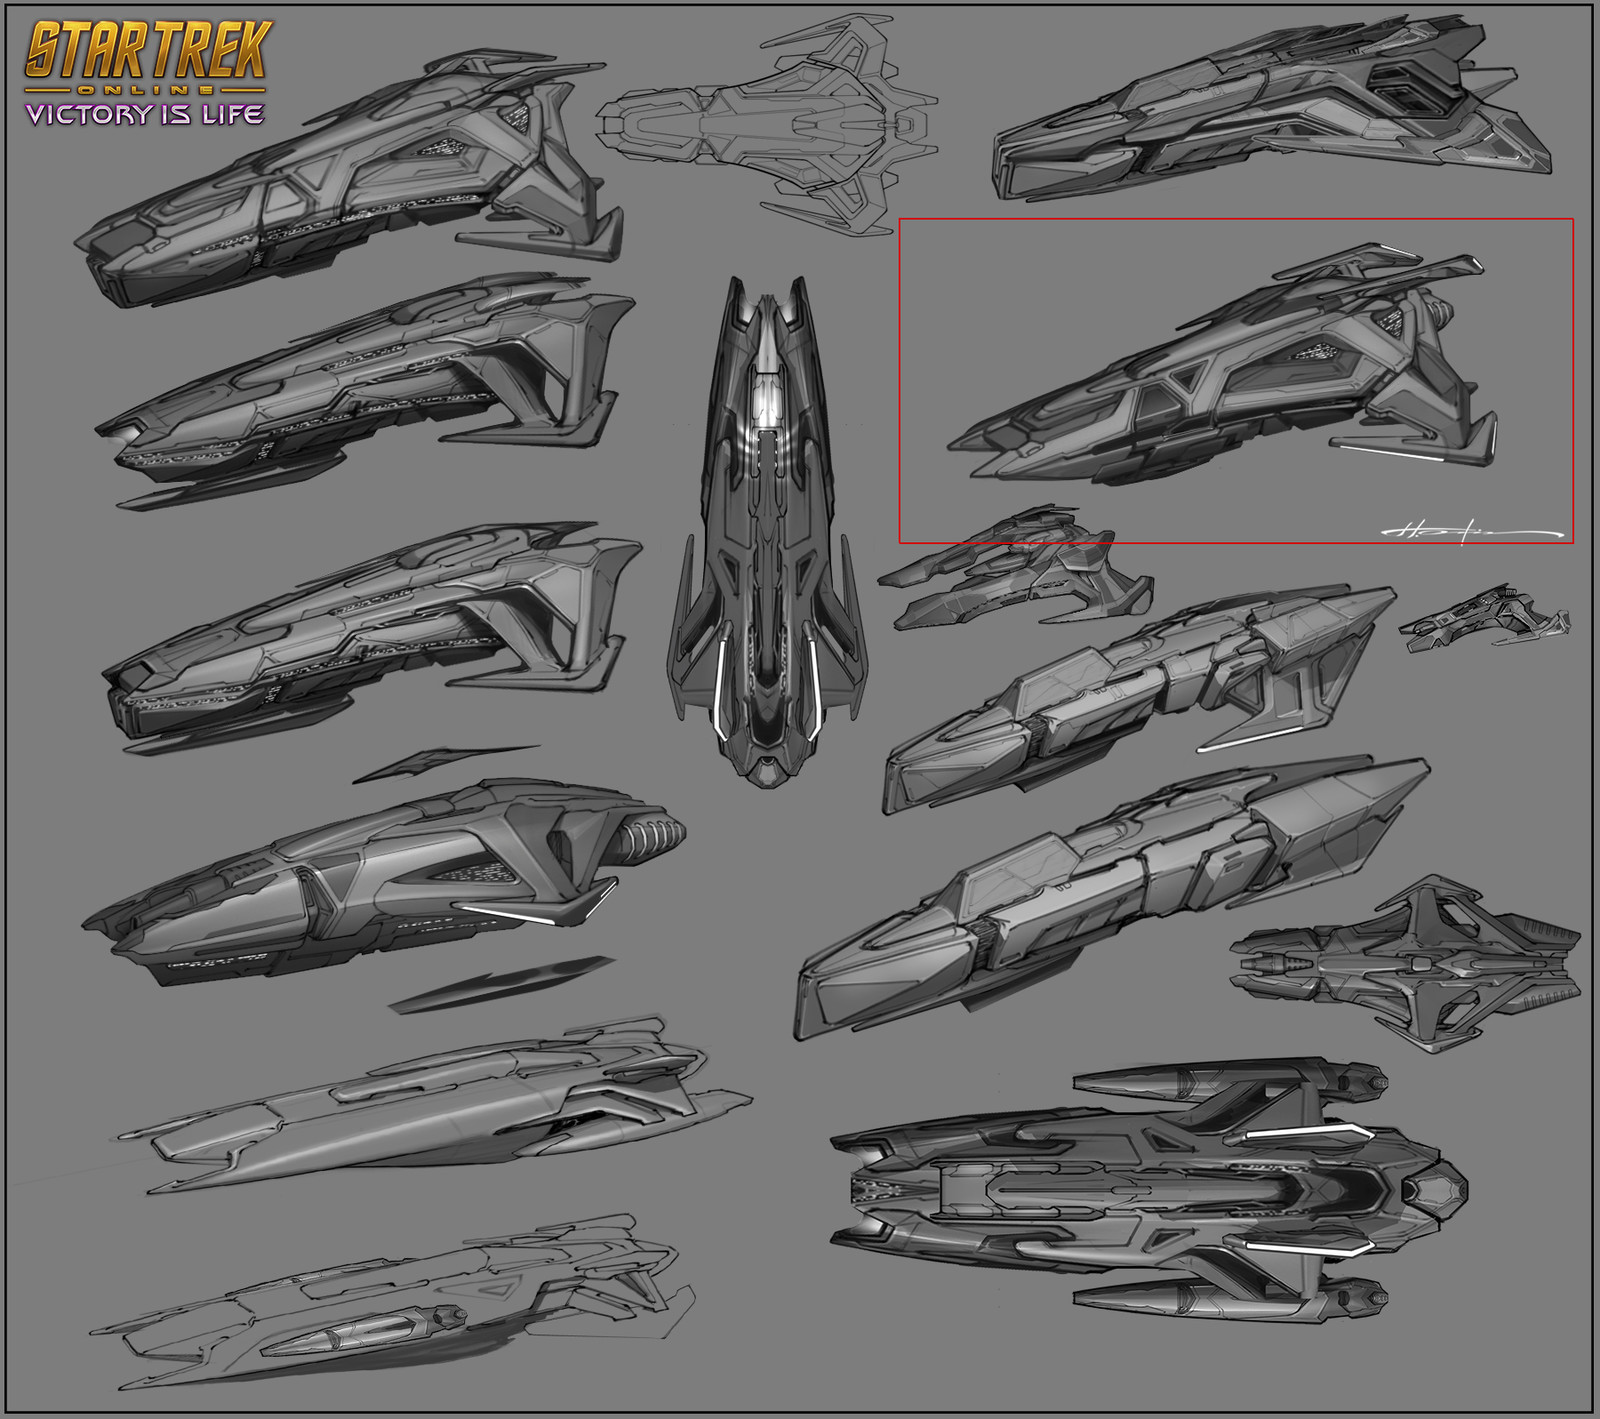 Here you can see some early style variations. I try to keep the sketches angles similar so I can exchange parts between them. Weapons, armors and other ships can be kit-bashed from here thus keeping the style consistent across the board.